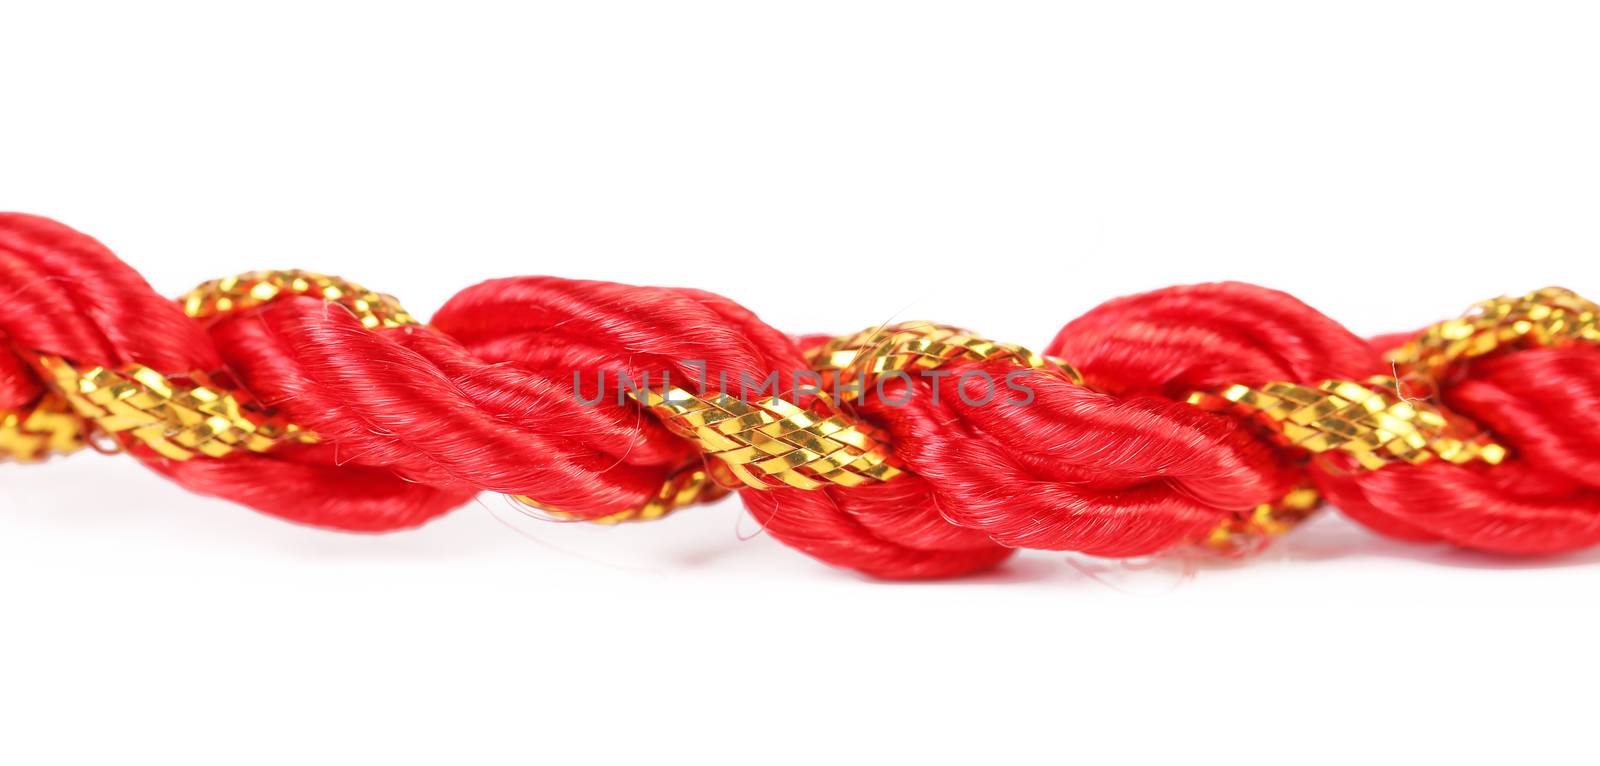 Red and gold gift wrapping cord. Isolated on a white background